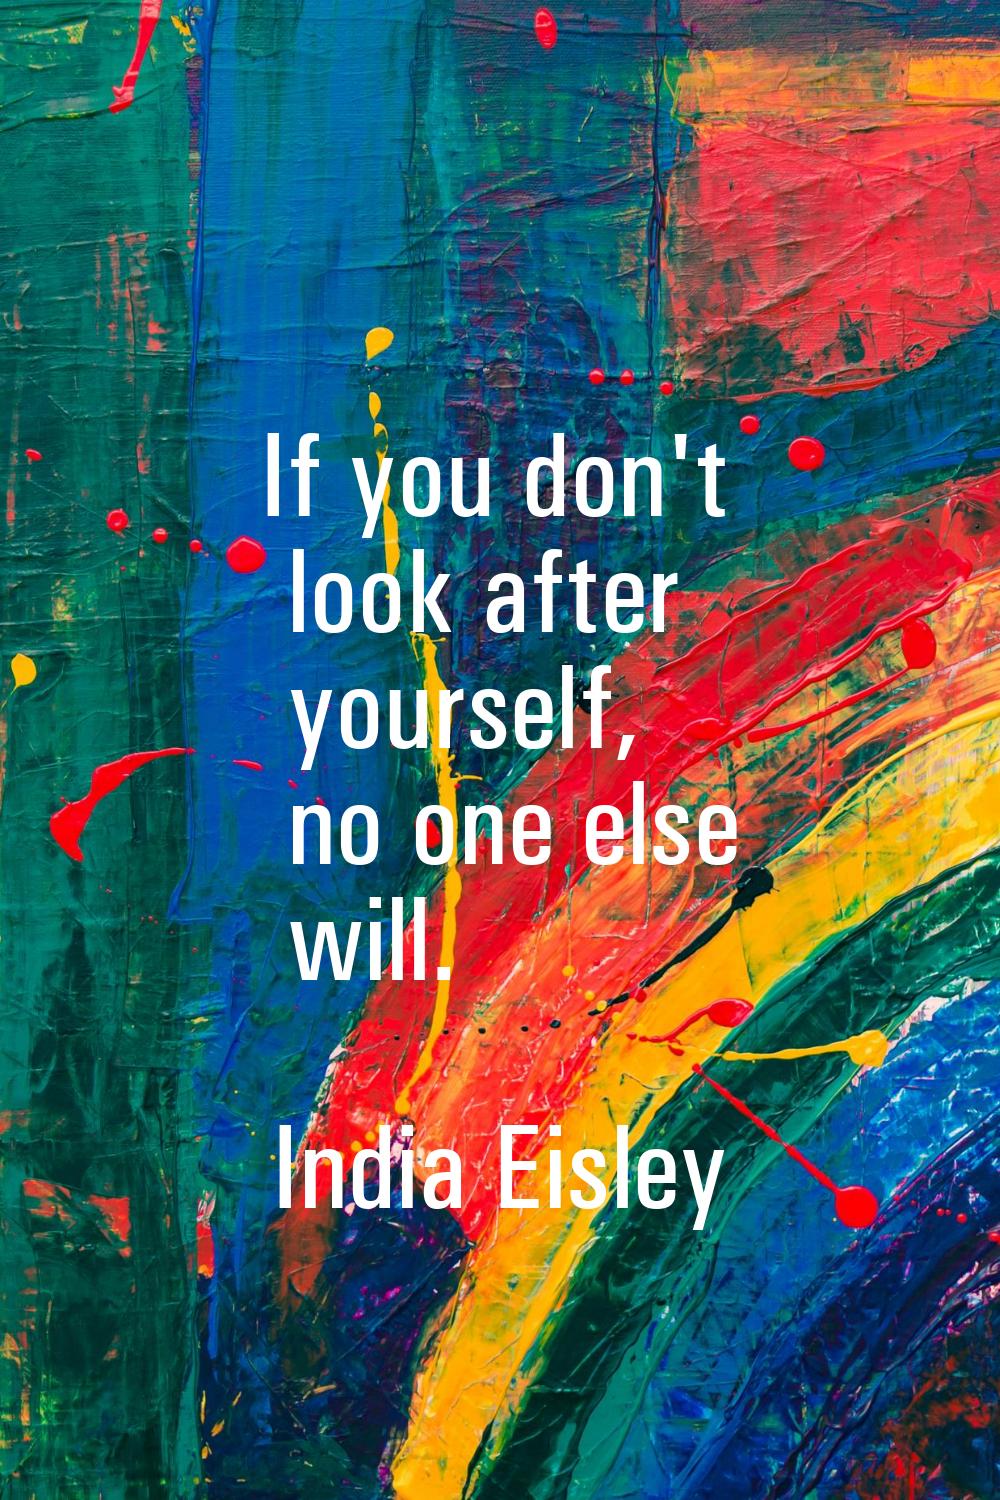 If you don't look after yourself, no one else will.